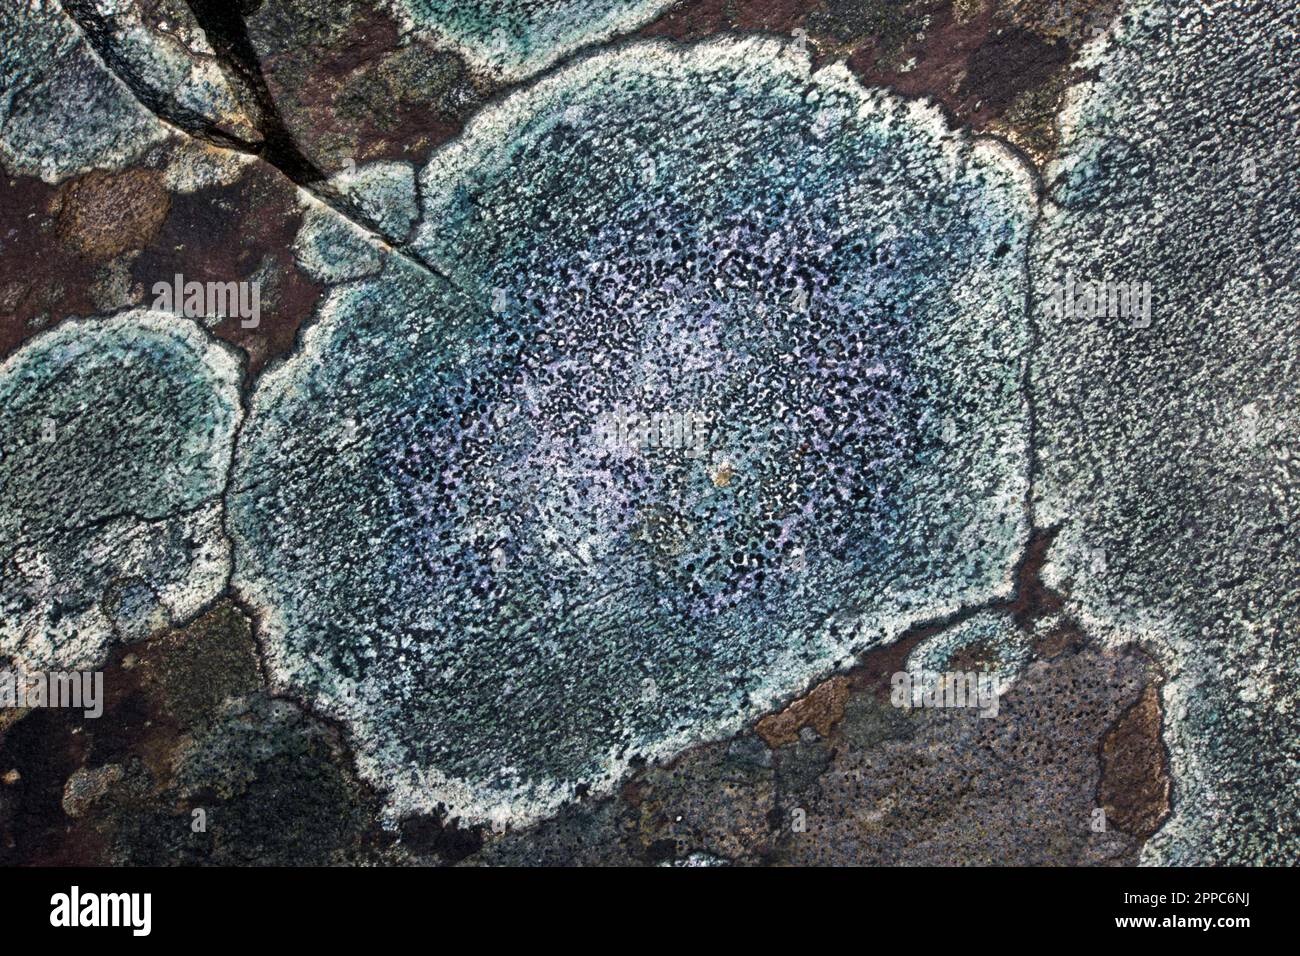 Buellia aethalea is a crustose lichen found on acidic rock. The pictures here are on slate. It has a global distribution. Stock Photo